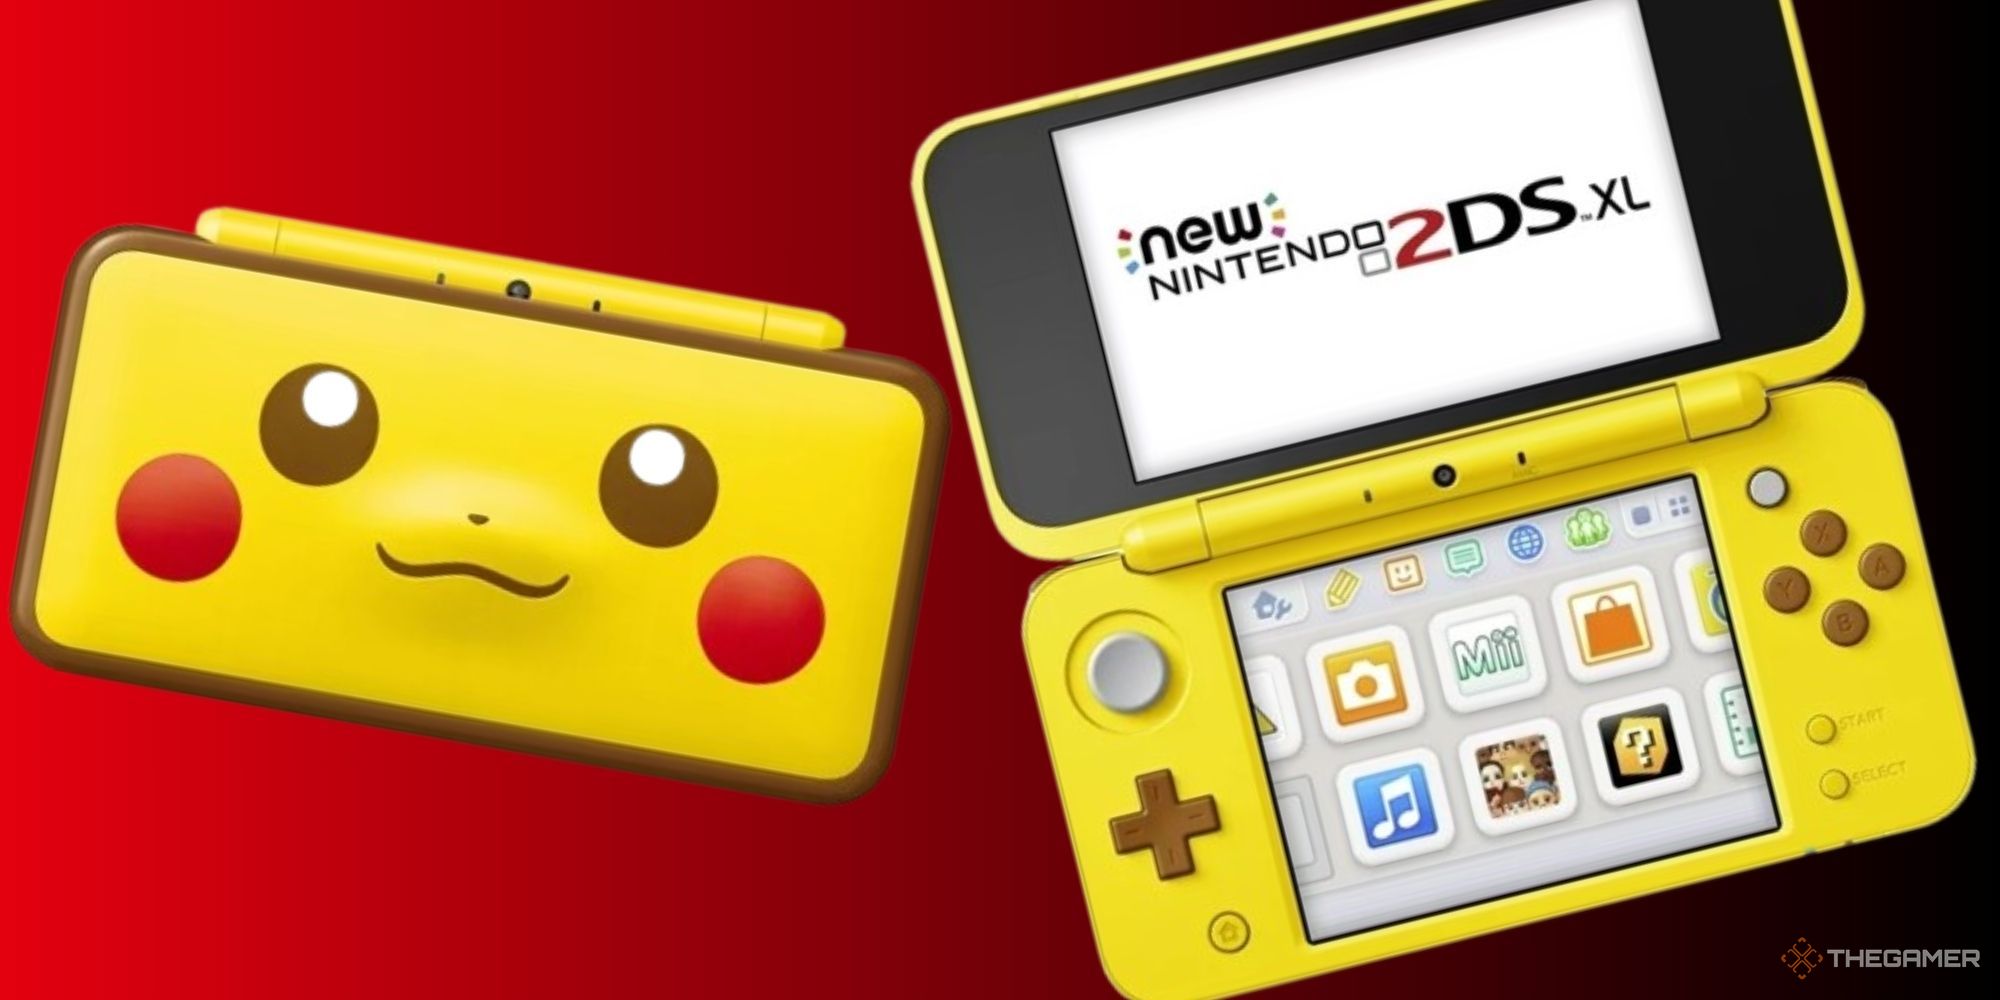 Images of a Pikachu themed Nintendo 3DS on a red and black background